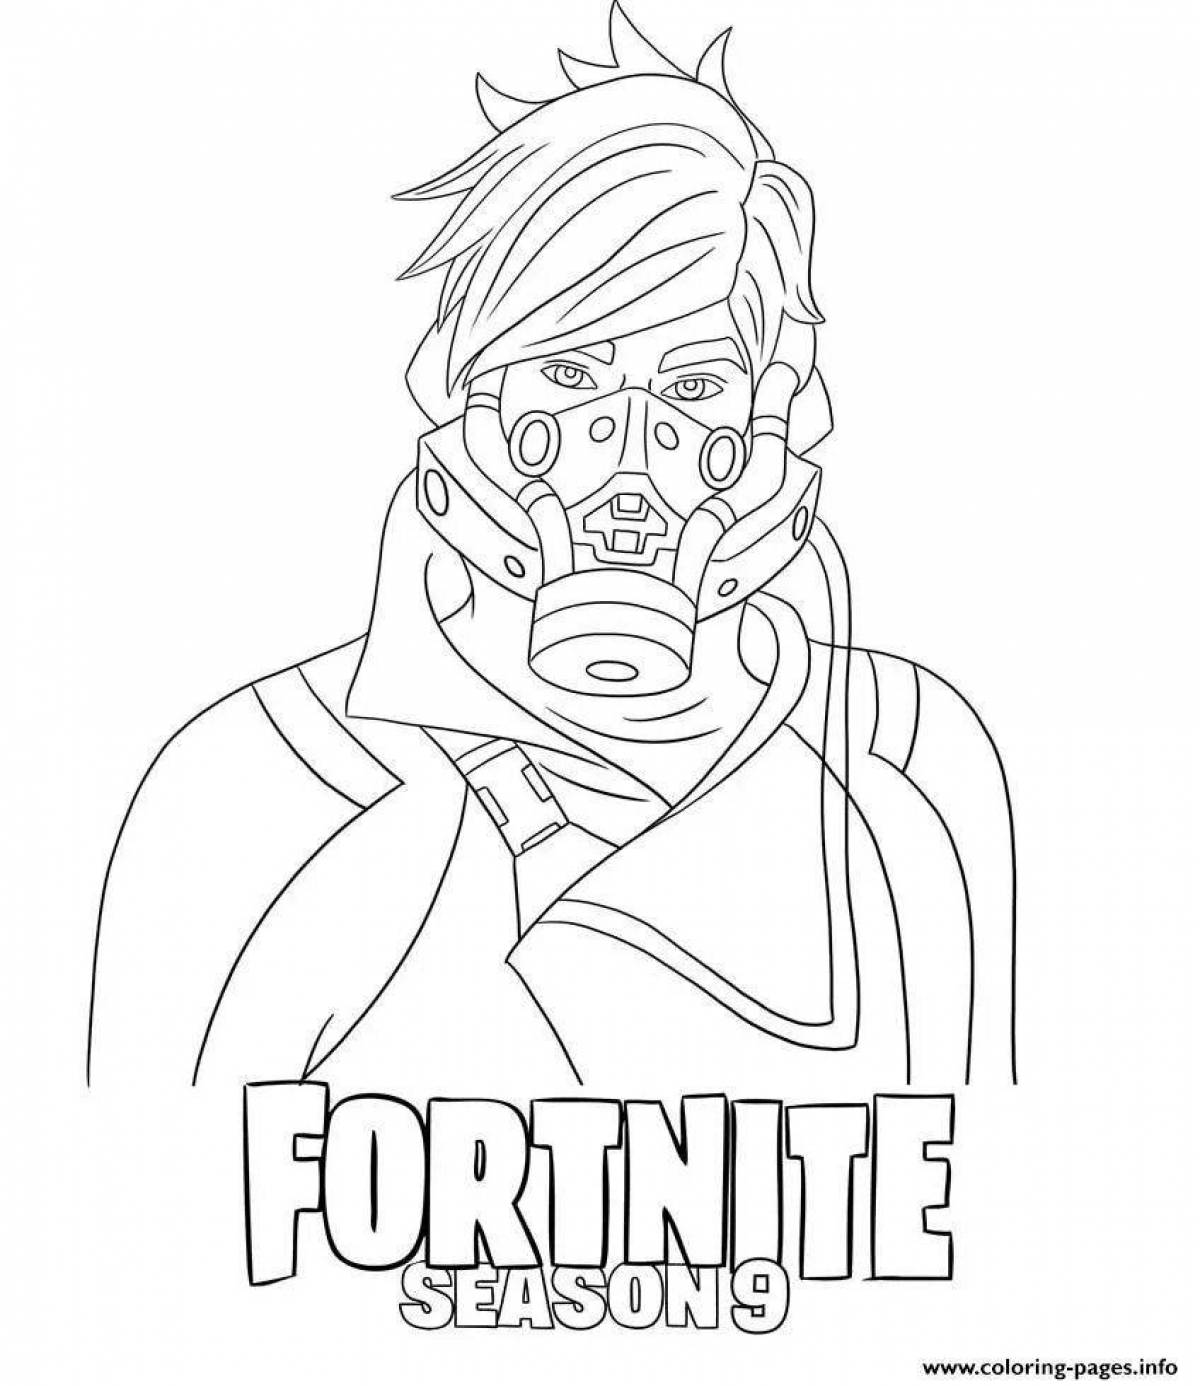 Color crazy banana fortnite coloring page